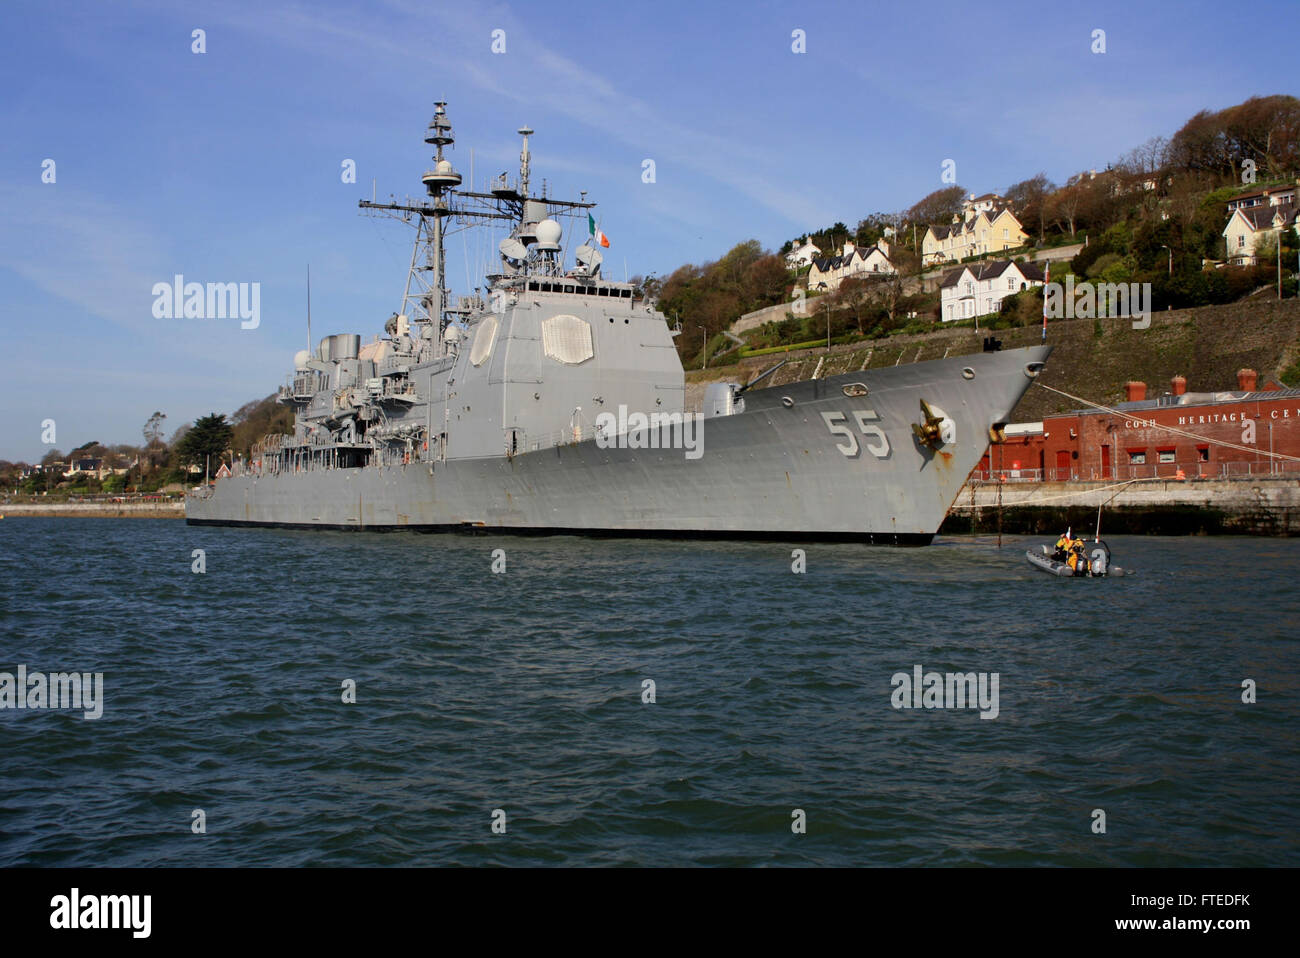 140415-N-ZZ999-006: COBH, Republic of Ireland (April 15, 2014) - USS Leyte Gulf (CG 55) is moored in Cobh for a port visit. The visit serves to continue U.S. 6th Fleet’s efforts to strengthen maritime partnerships in order to enhance regional stability. (U.S. Navy photo by Ensign John Stevens/Released) Stock Photo